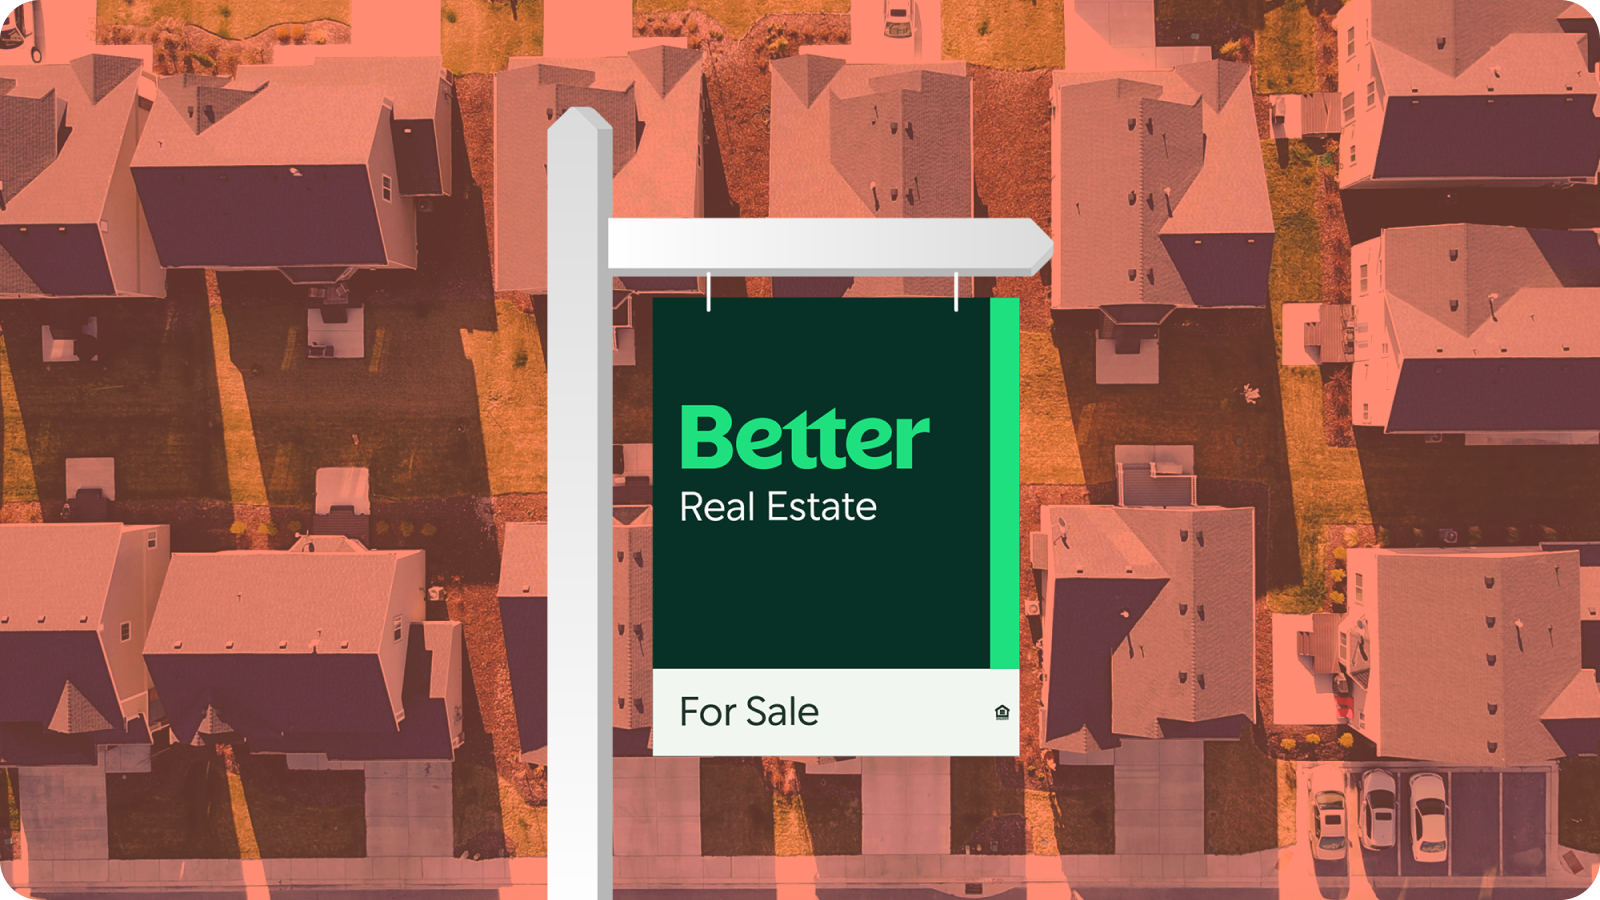 "Image of Better Real Estate For Sale sign with subdivision of homes in the background